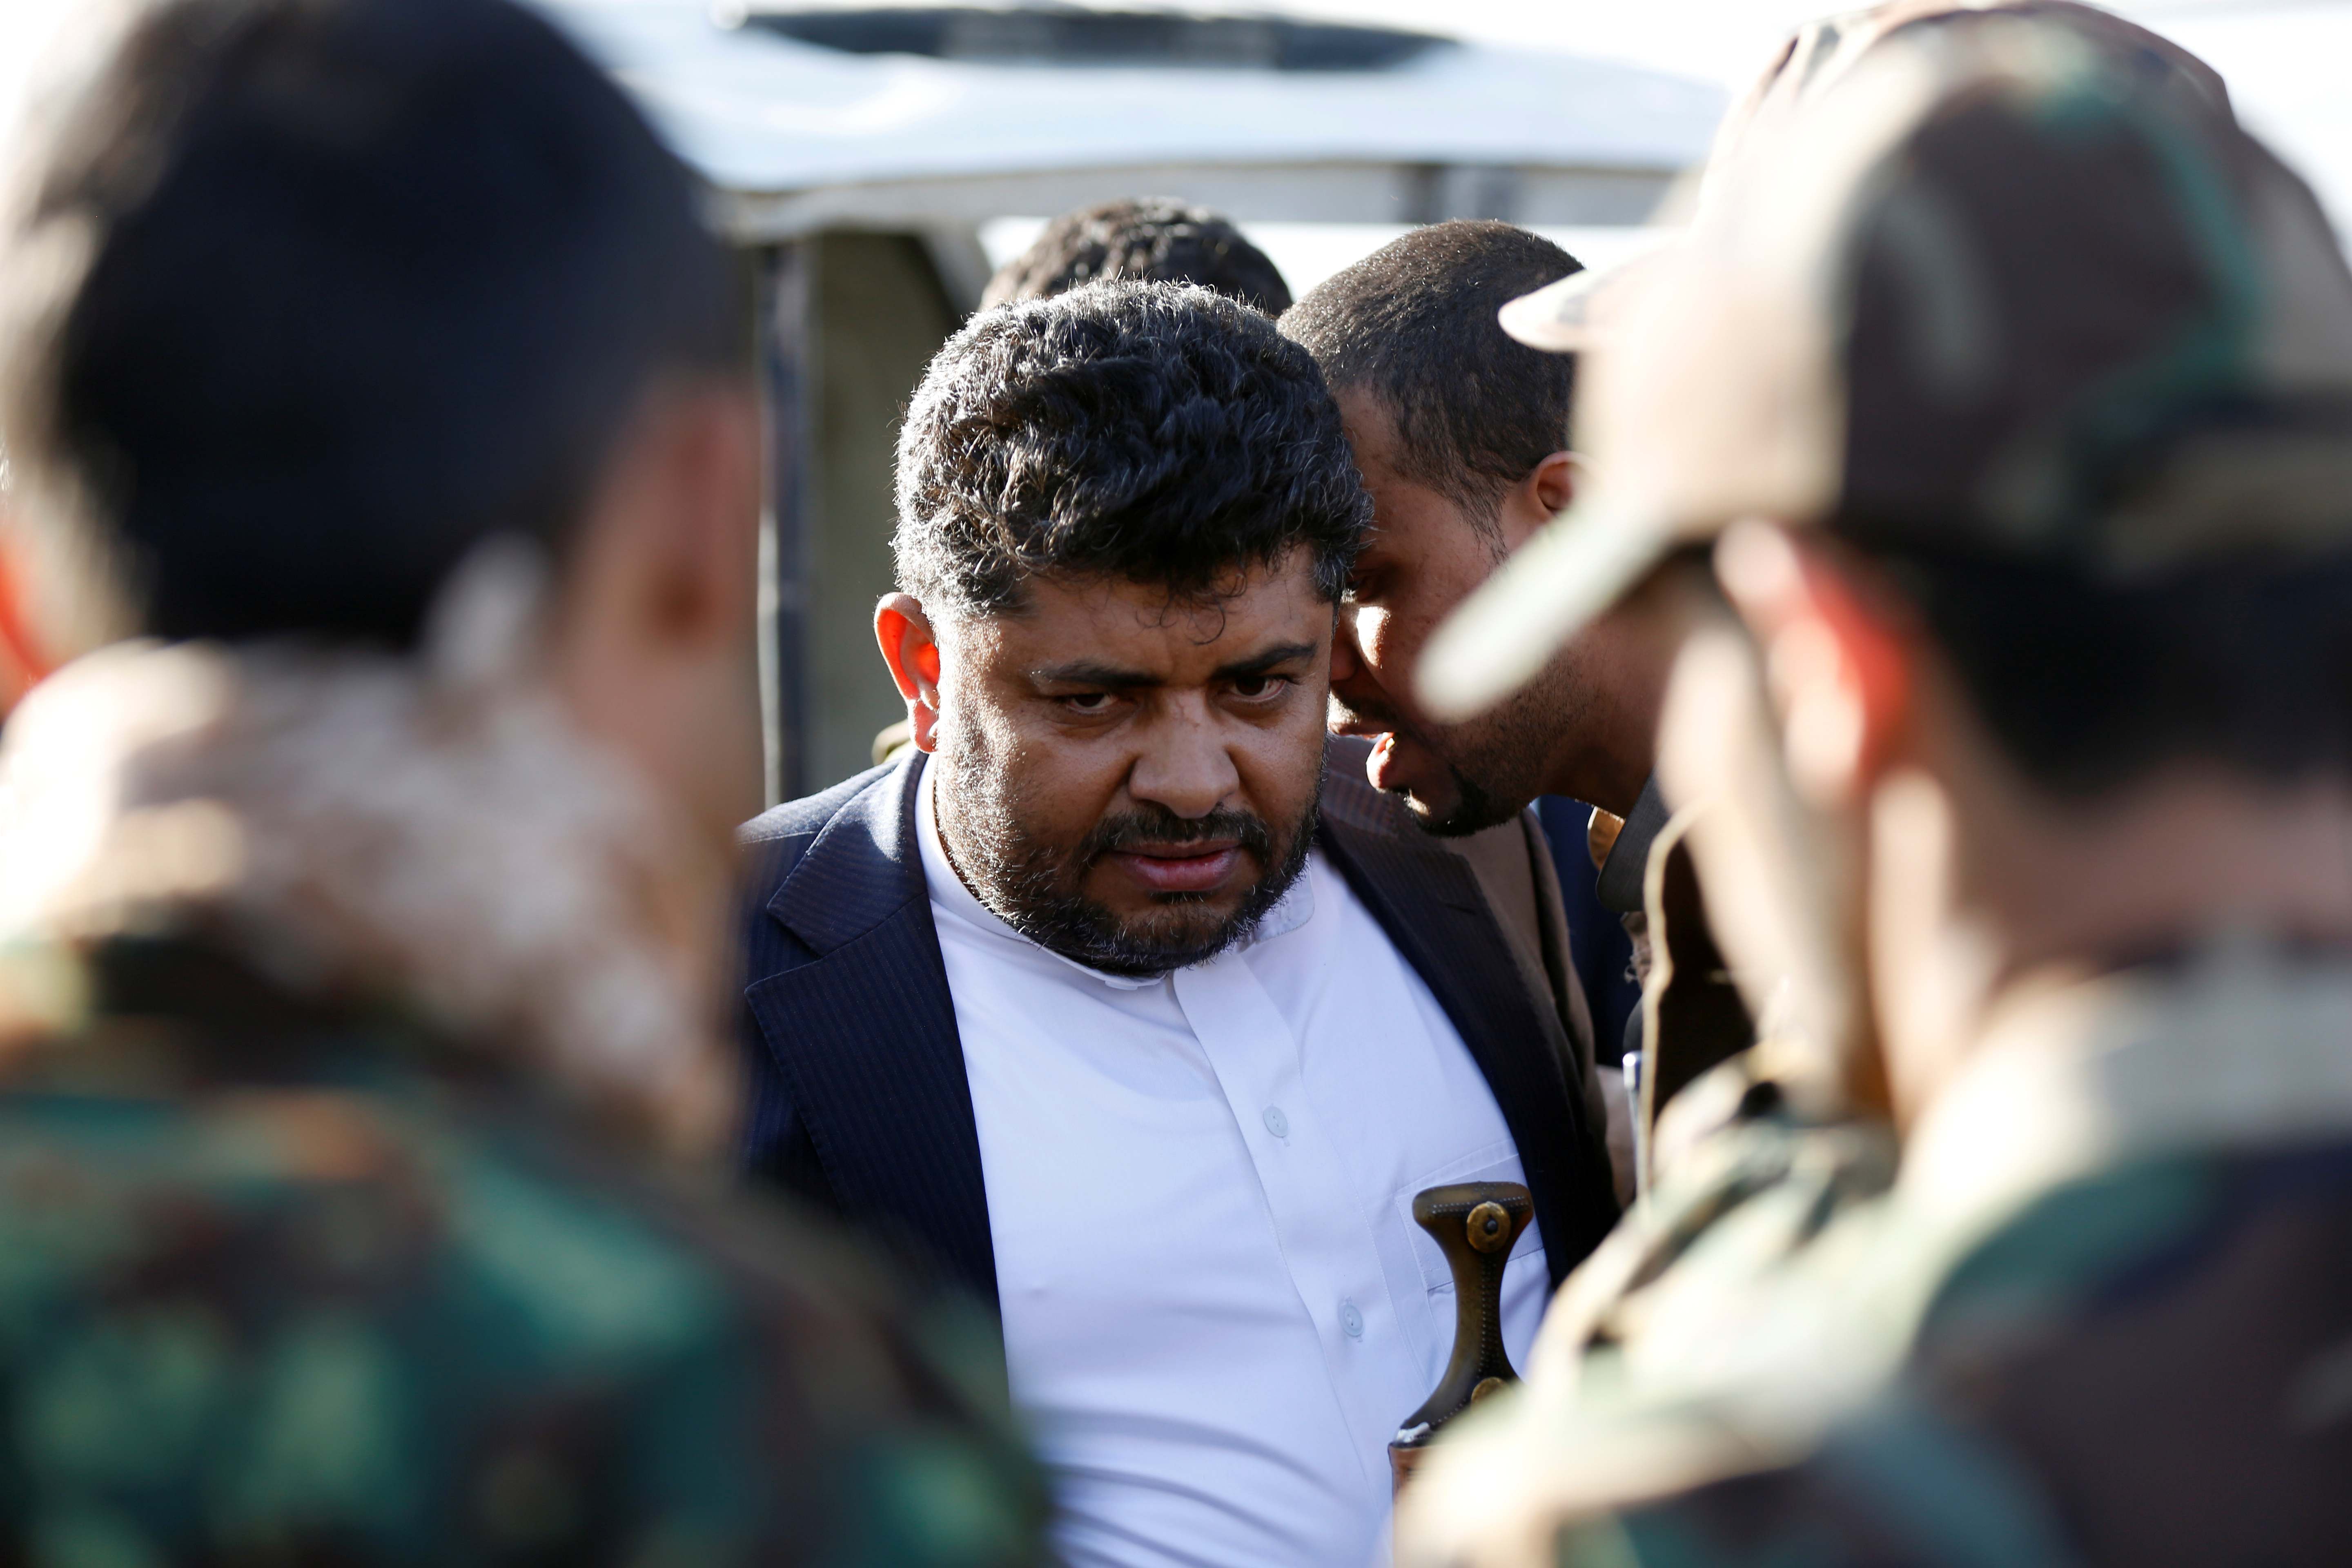 Mohamed Ali al-Houthi, head of the Houthi supreme revolutionary committee, is surrounded by guards as he attends a rally in Sanaa, Yemen